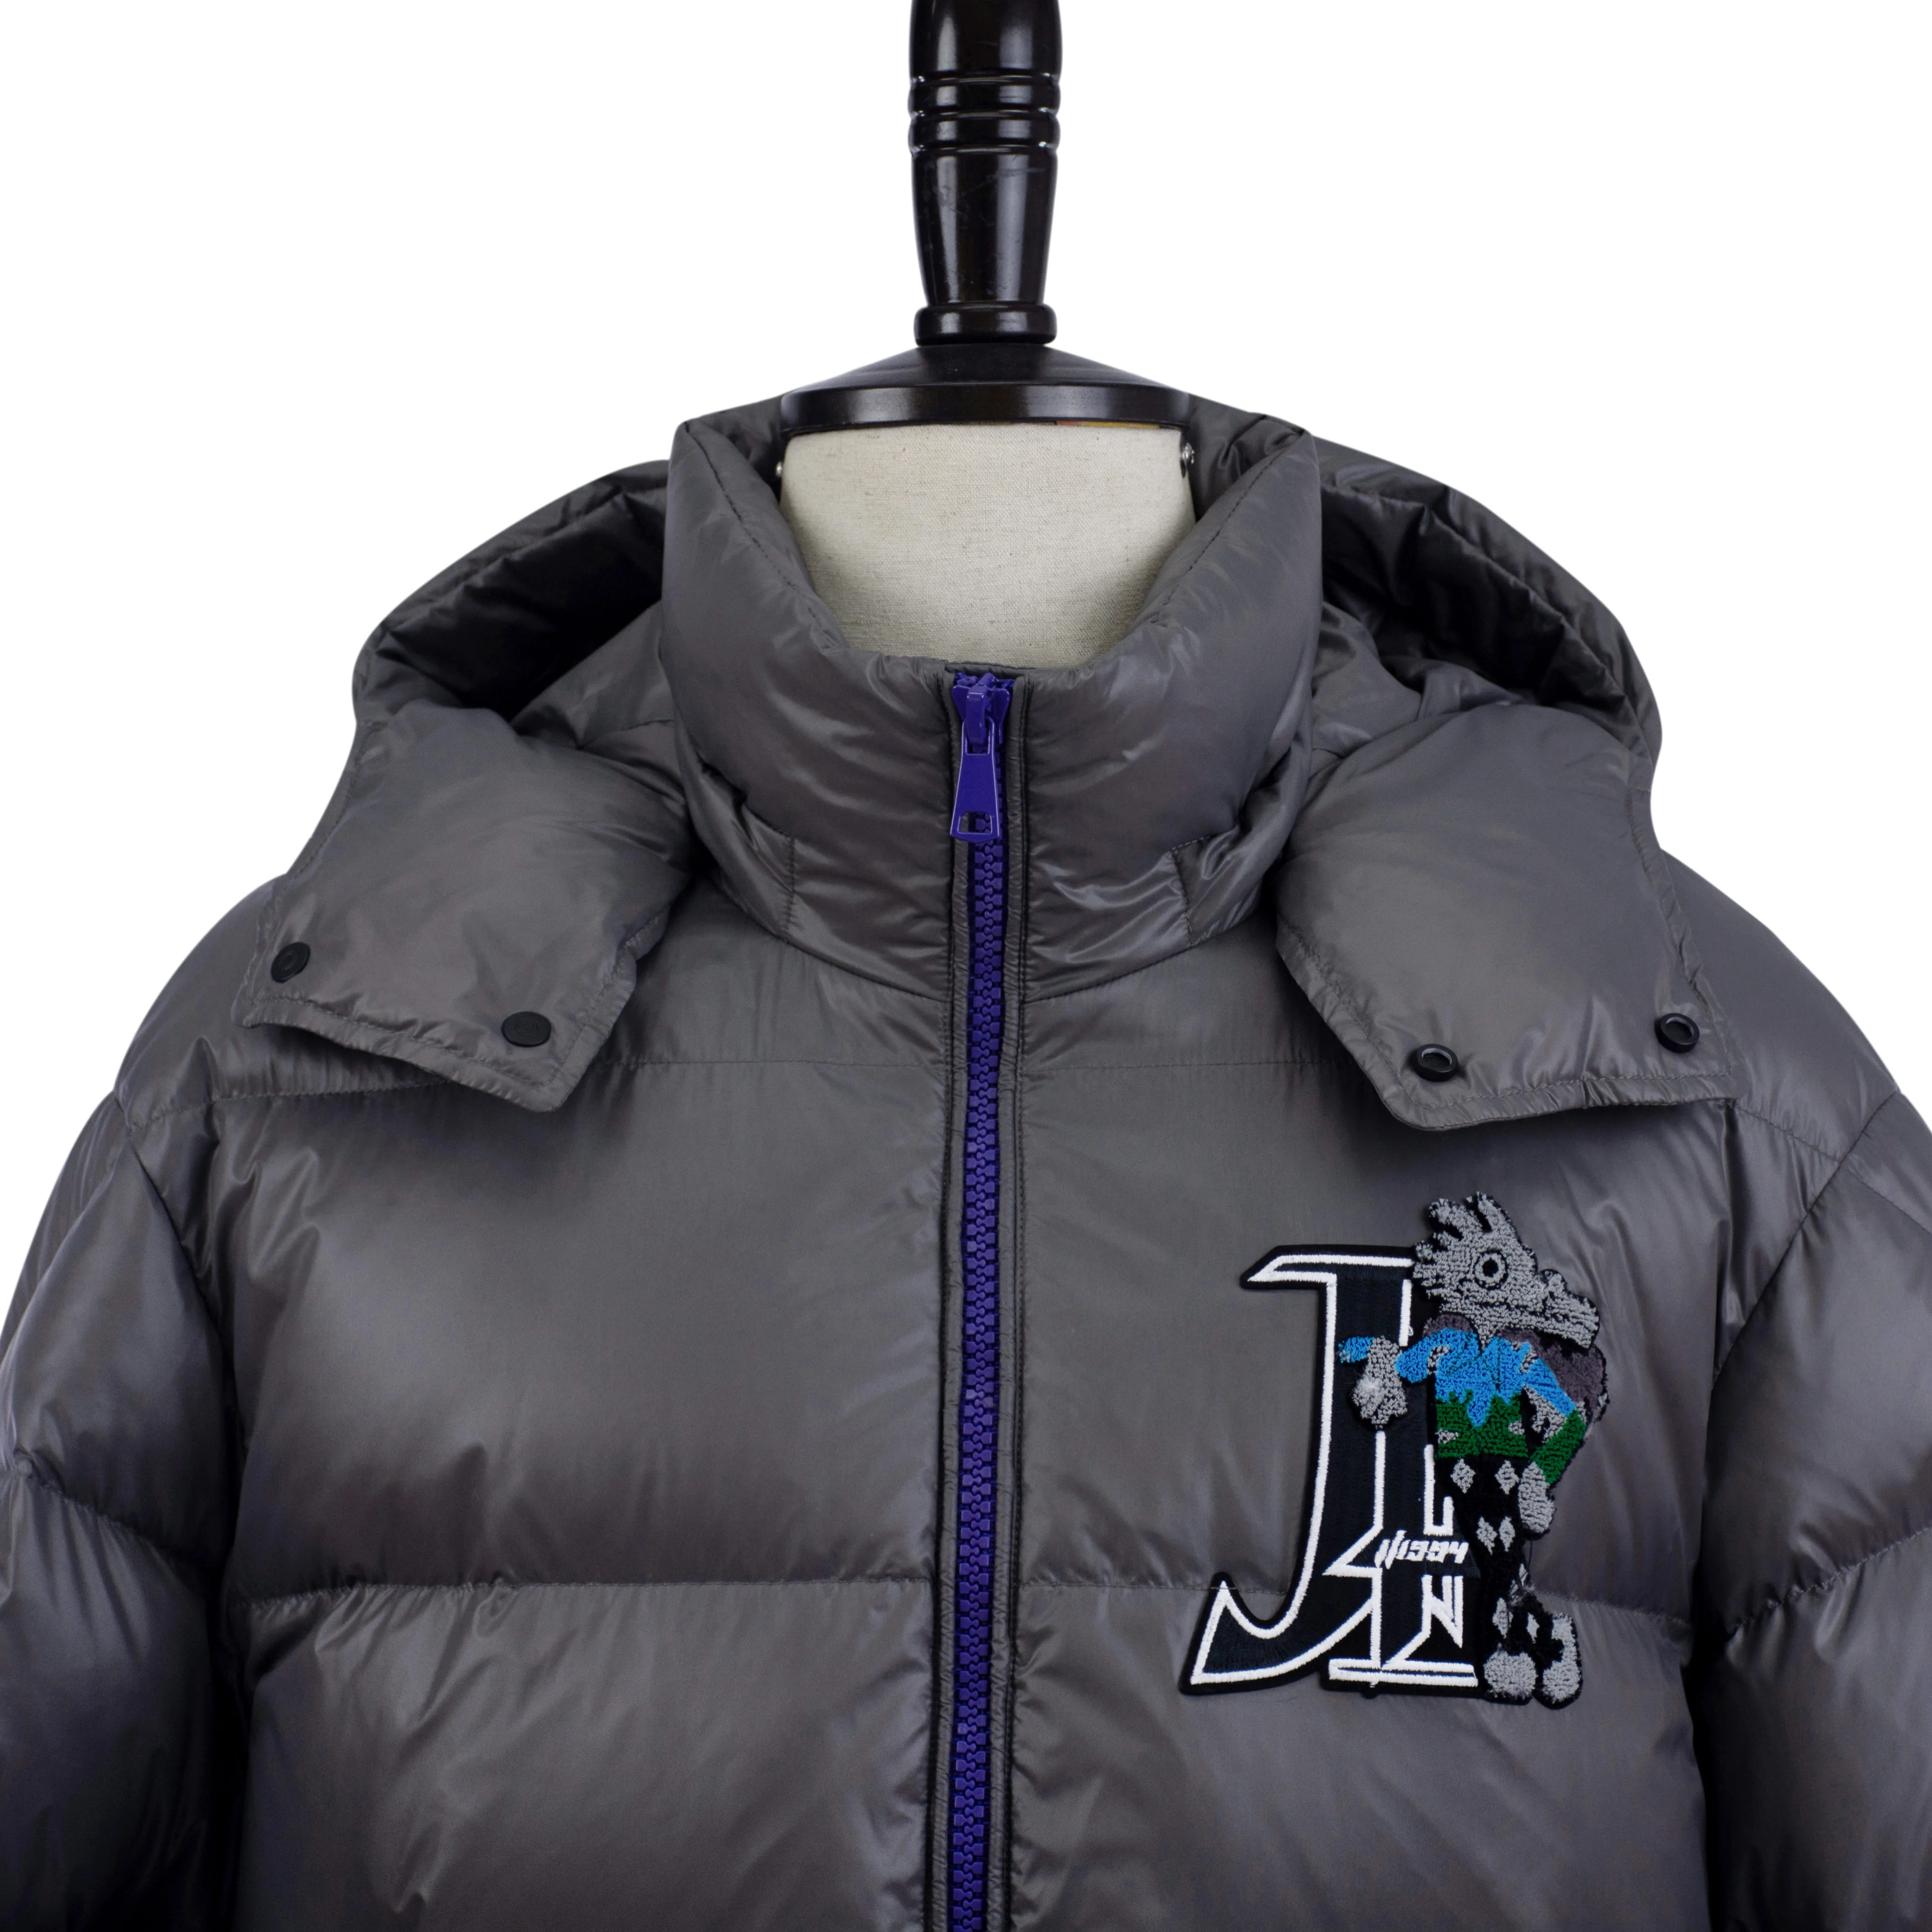 High Quality 90% Duck Down Warm Standing Collar Hooded Windproof Black Embroidered Zipper Men's Down Jacket For Winter Outdoor